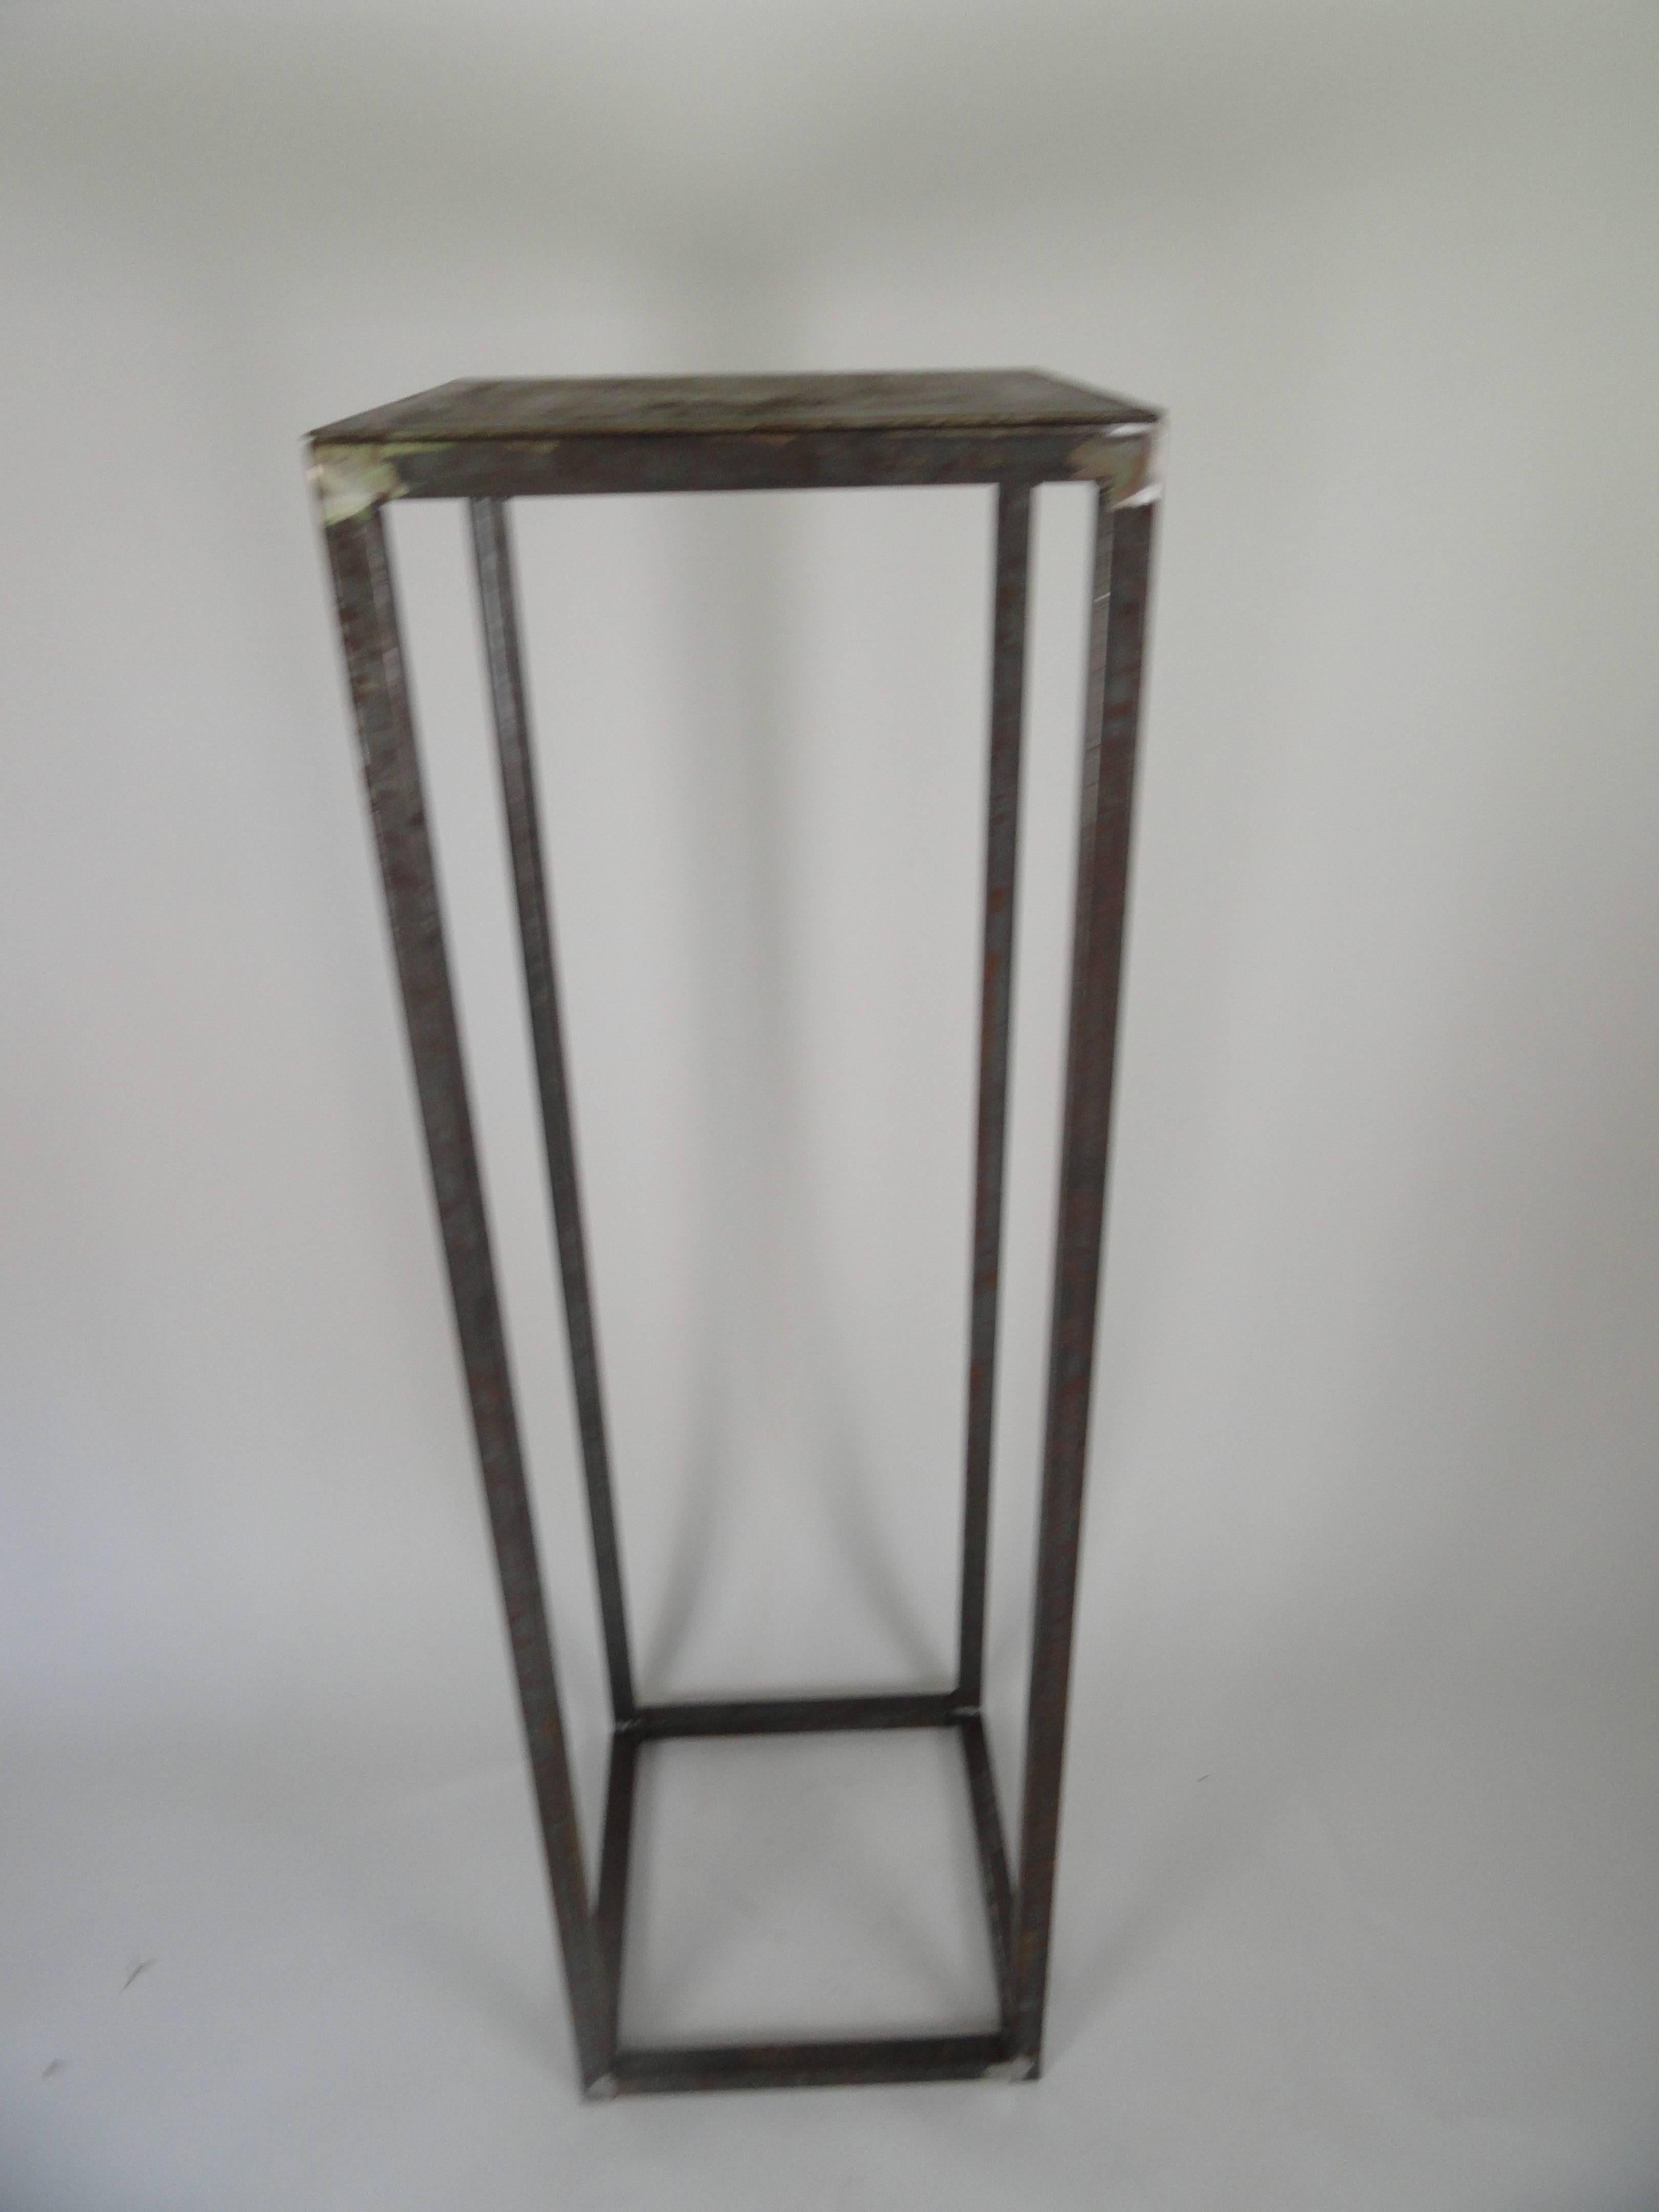 This is a custom metal pedestal in a natural finish. It is designed to hold and display that special object. The contrast between a glass or wood object looks fantastic. A pair would look wonderful on either side of a major doorway.
Custom sizes